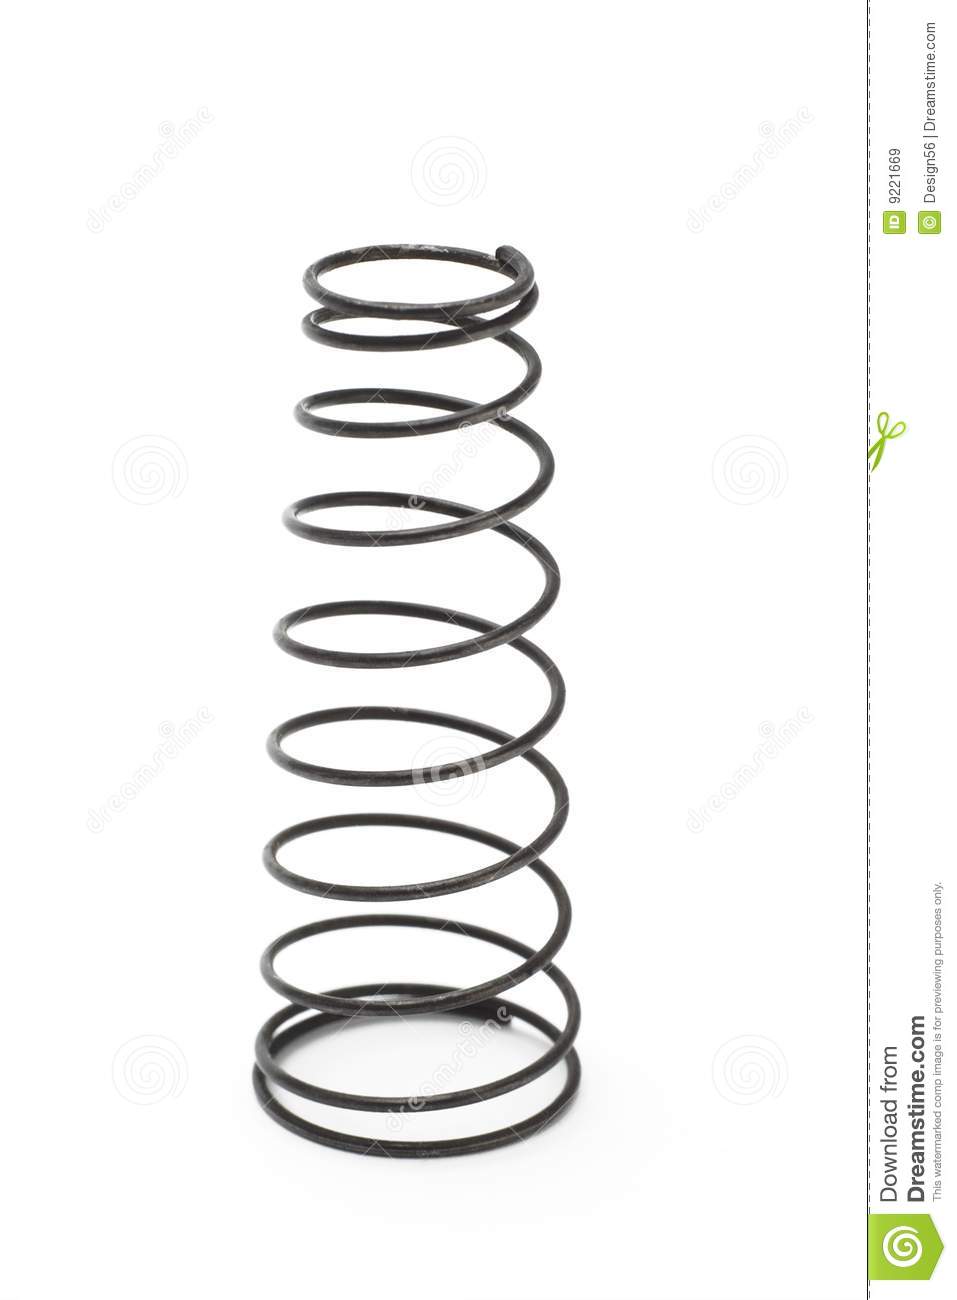 Spring Coil Clipart